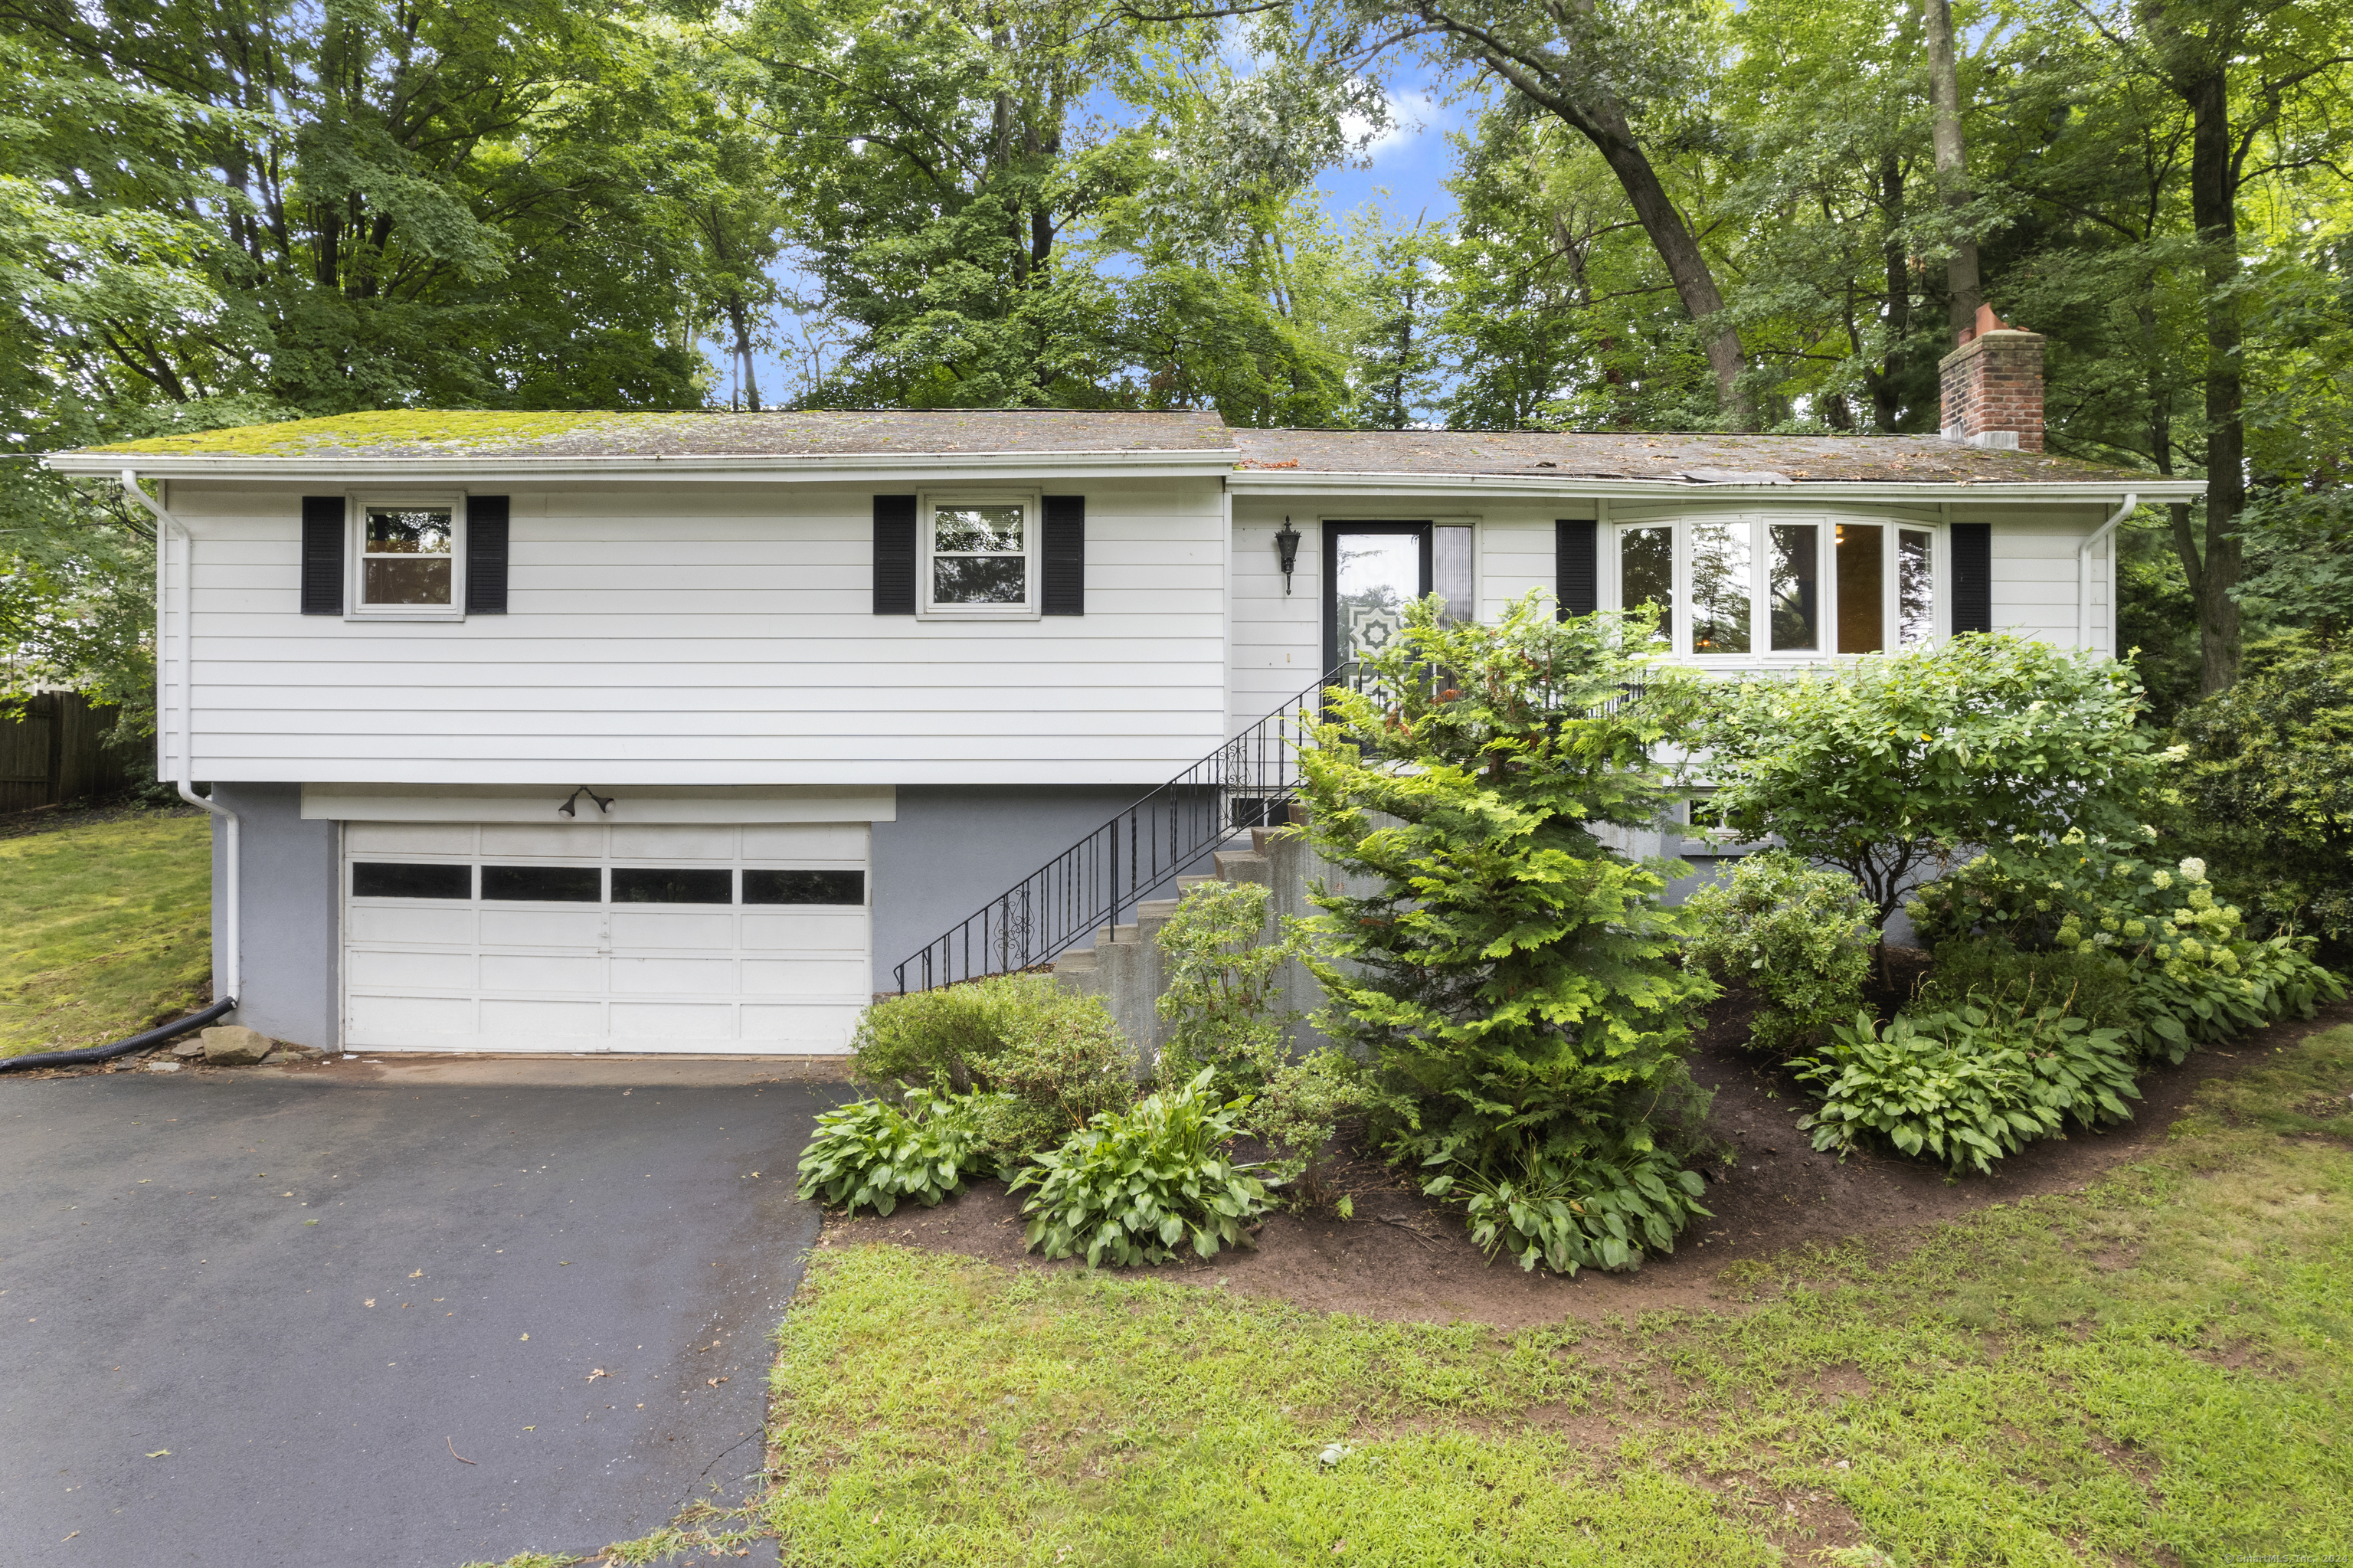 1071 King Road, Cheshire, Connecticut - 3 Bedrooms  
2 Bathrooms  
7 Rooms - 